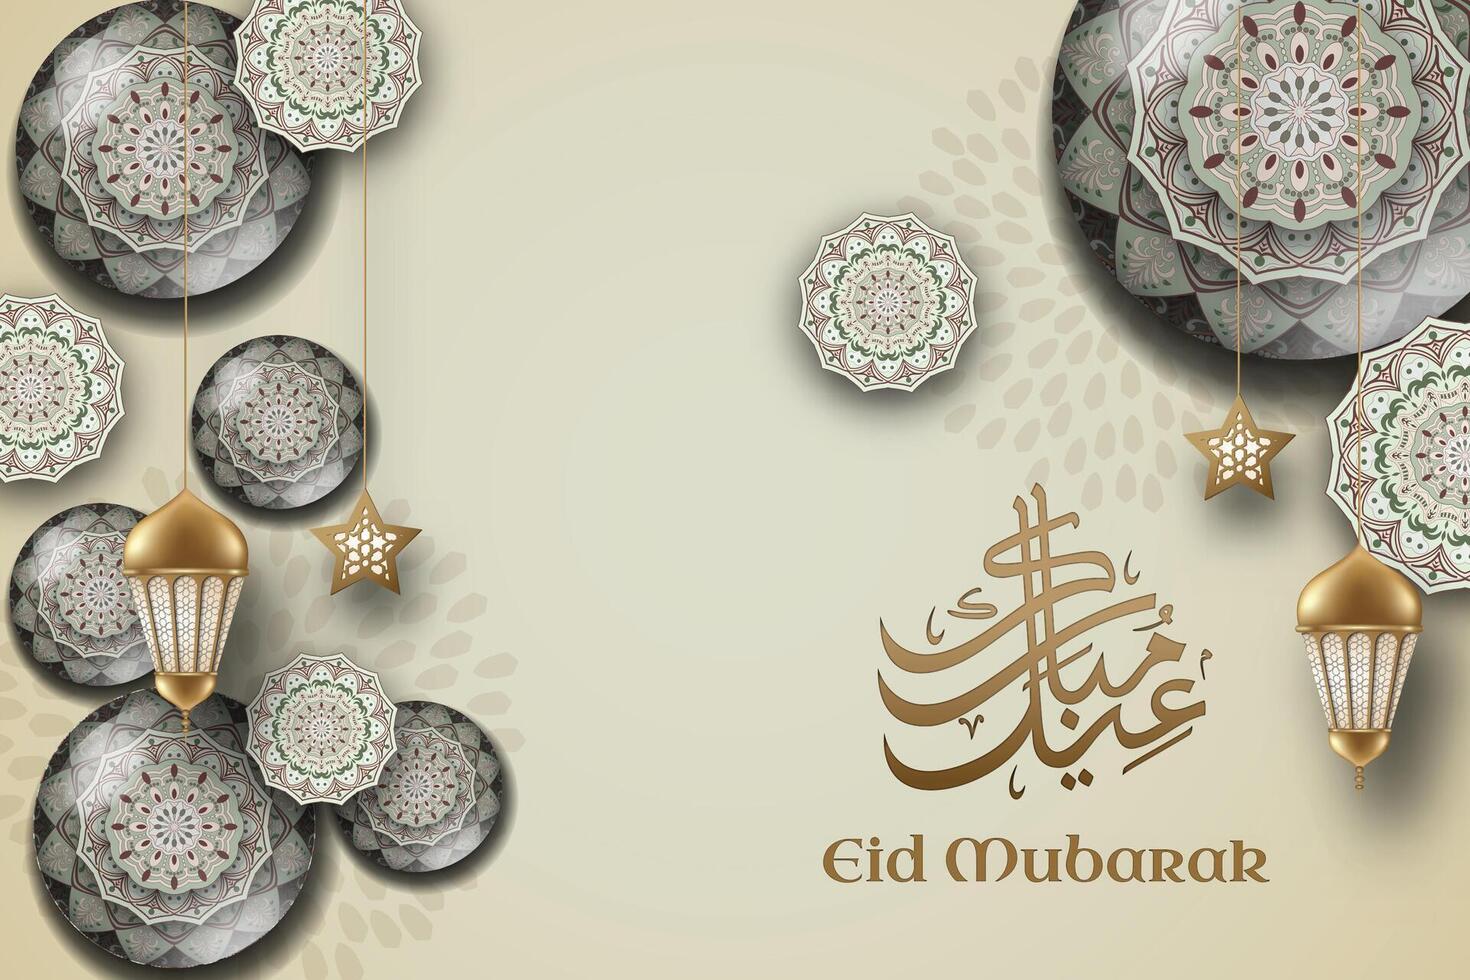 An illustration half glass globe of a greeting card eid mubarak with calligraphy text, lanter and mandala on beige background. vector